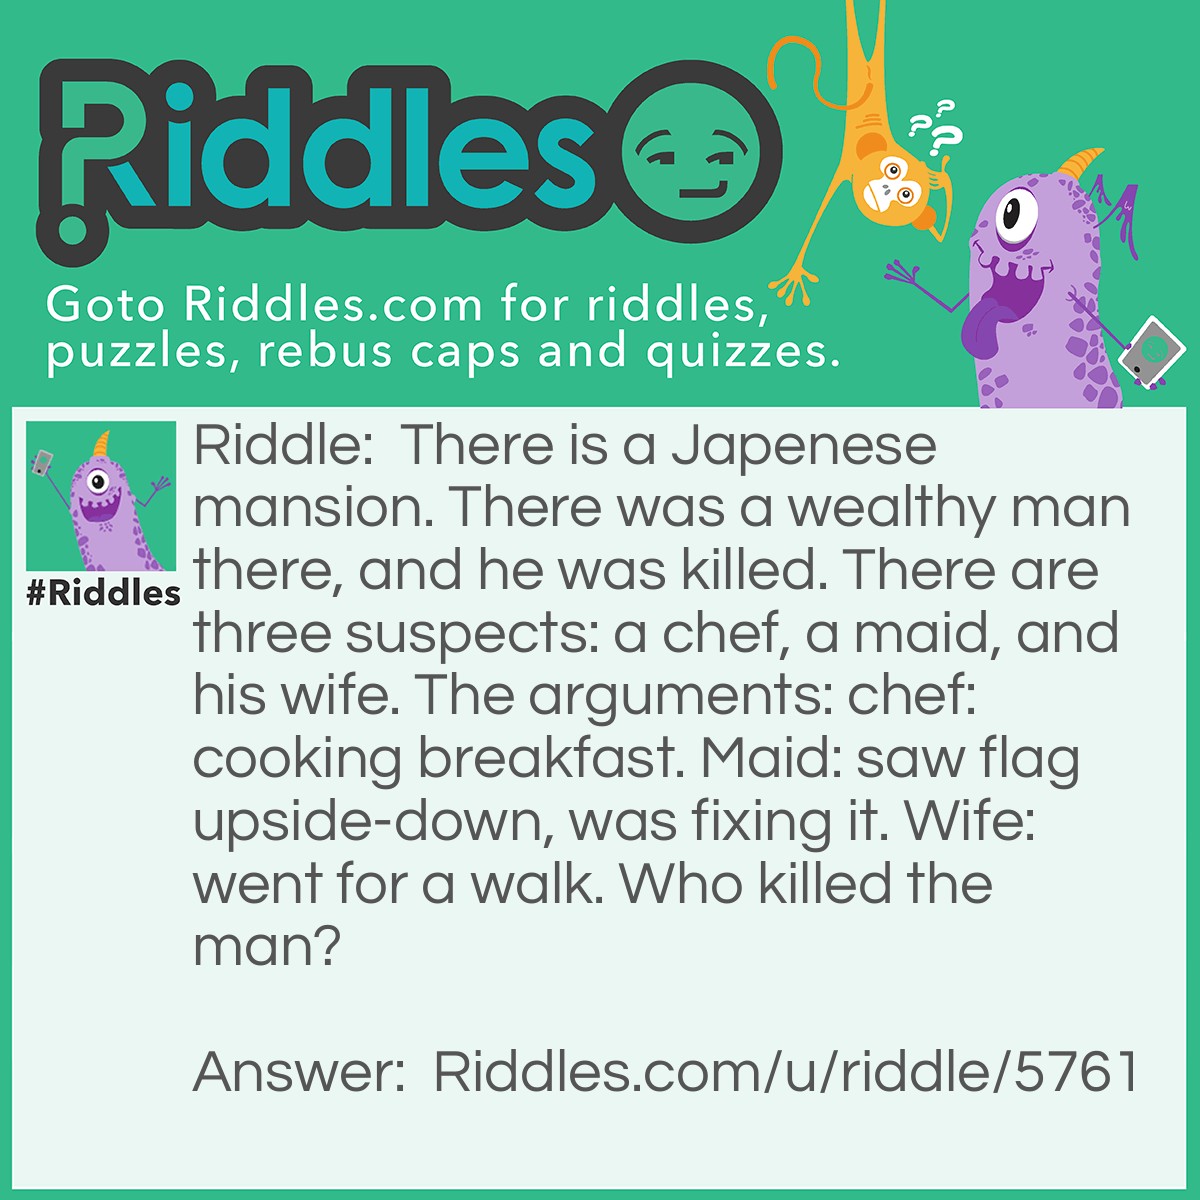 Riddle: There is a Japenese mansion. There was a wealthy man there, and he was killed. There are three suspects: a chef, a maid, and his wife. The arguments: chef: cooking breakfast. Maid: saw flag upside-down, was fixing it. Wife: went for a walk. Who killed the man? Answer: The maid. A Japenese flag cannot be upside-down.